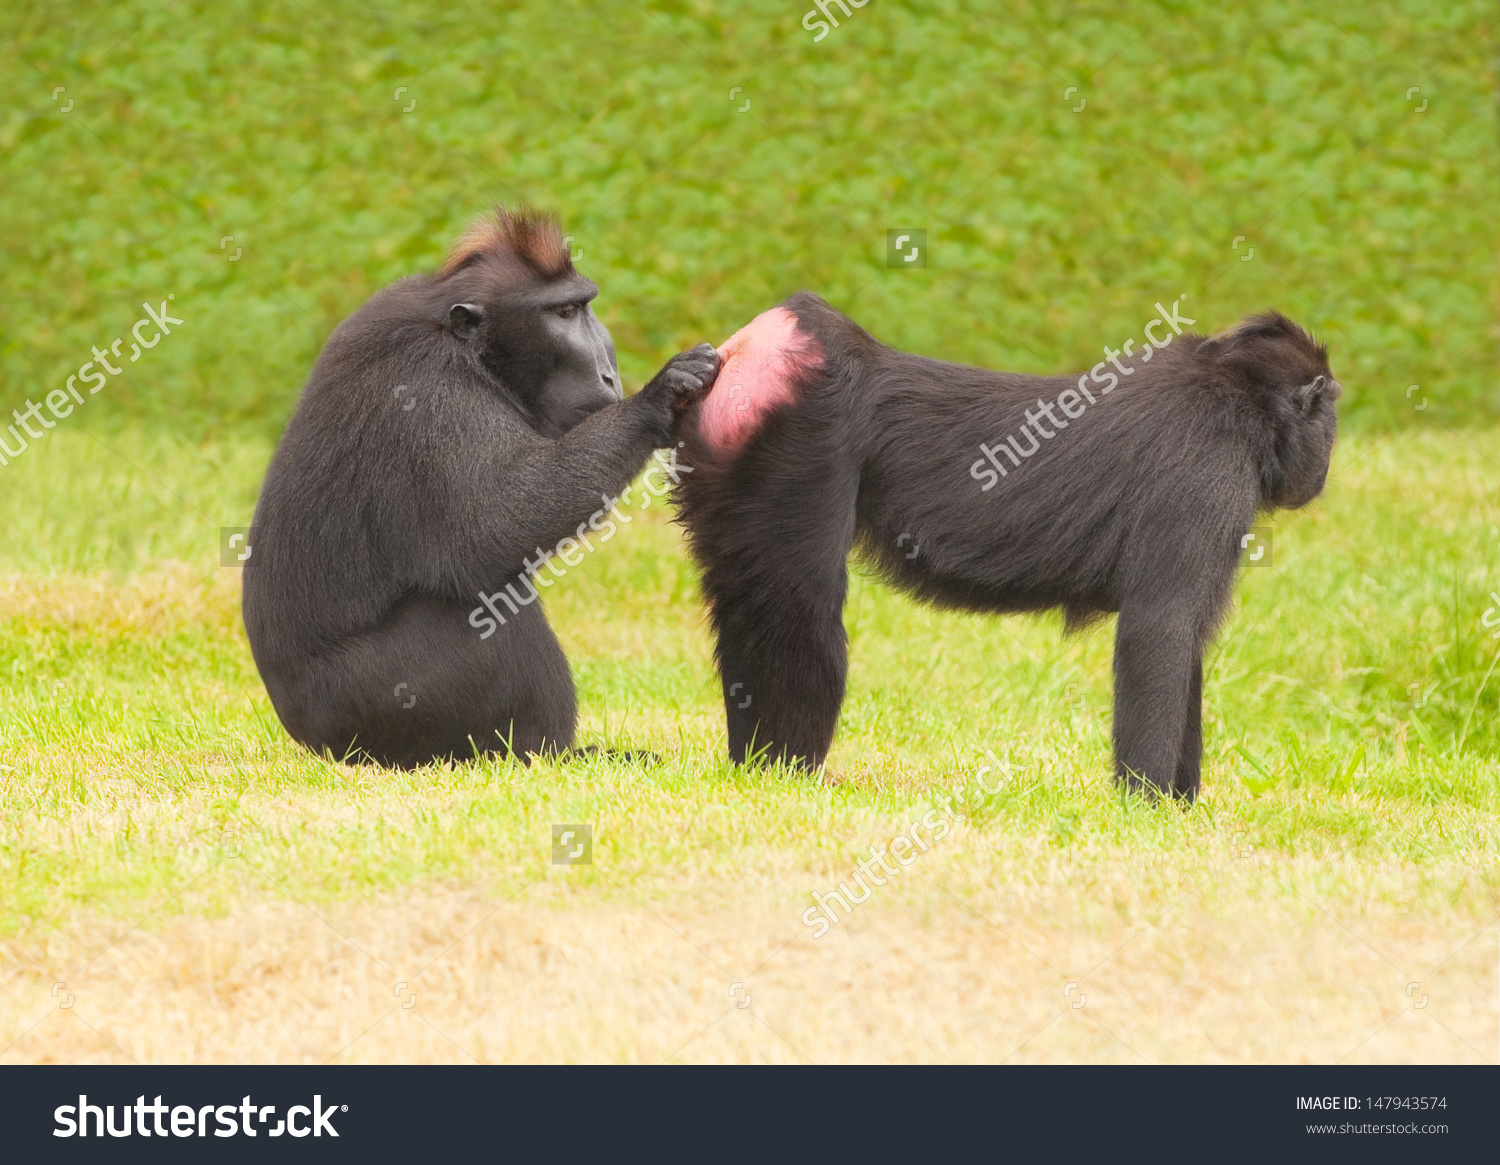 Celebes Crested Macaque clipart #1, Download drawings